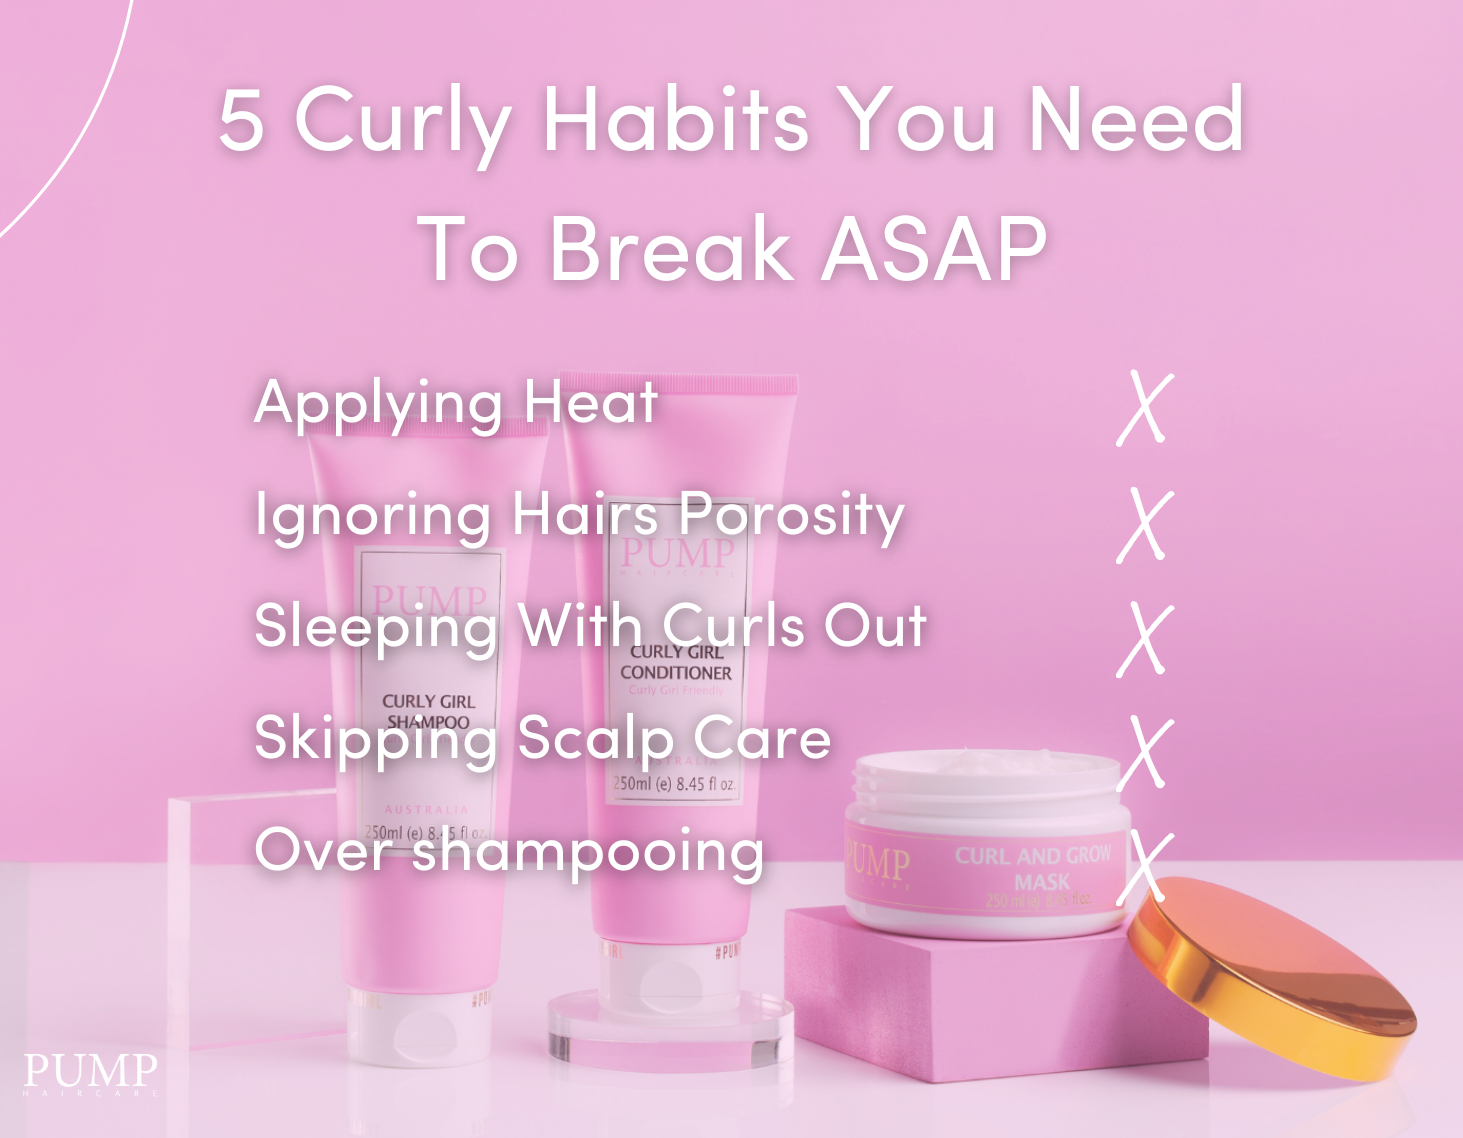 5 curly hair habits you need to break